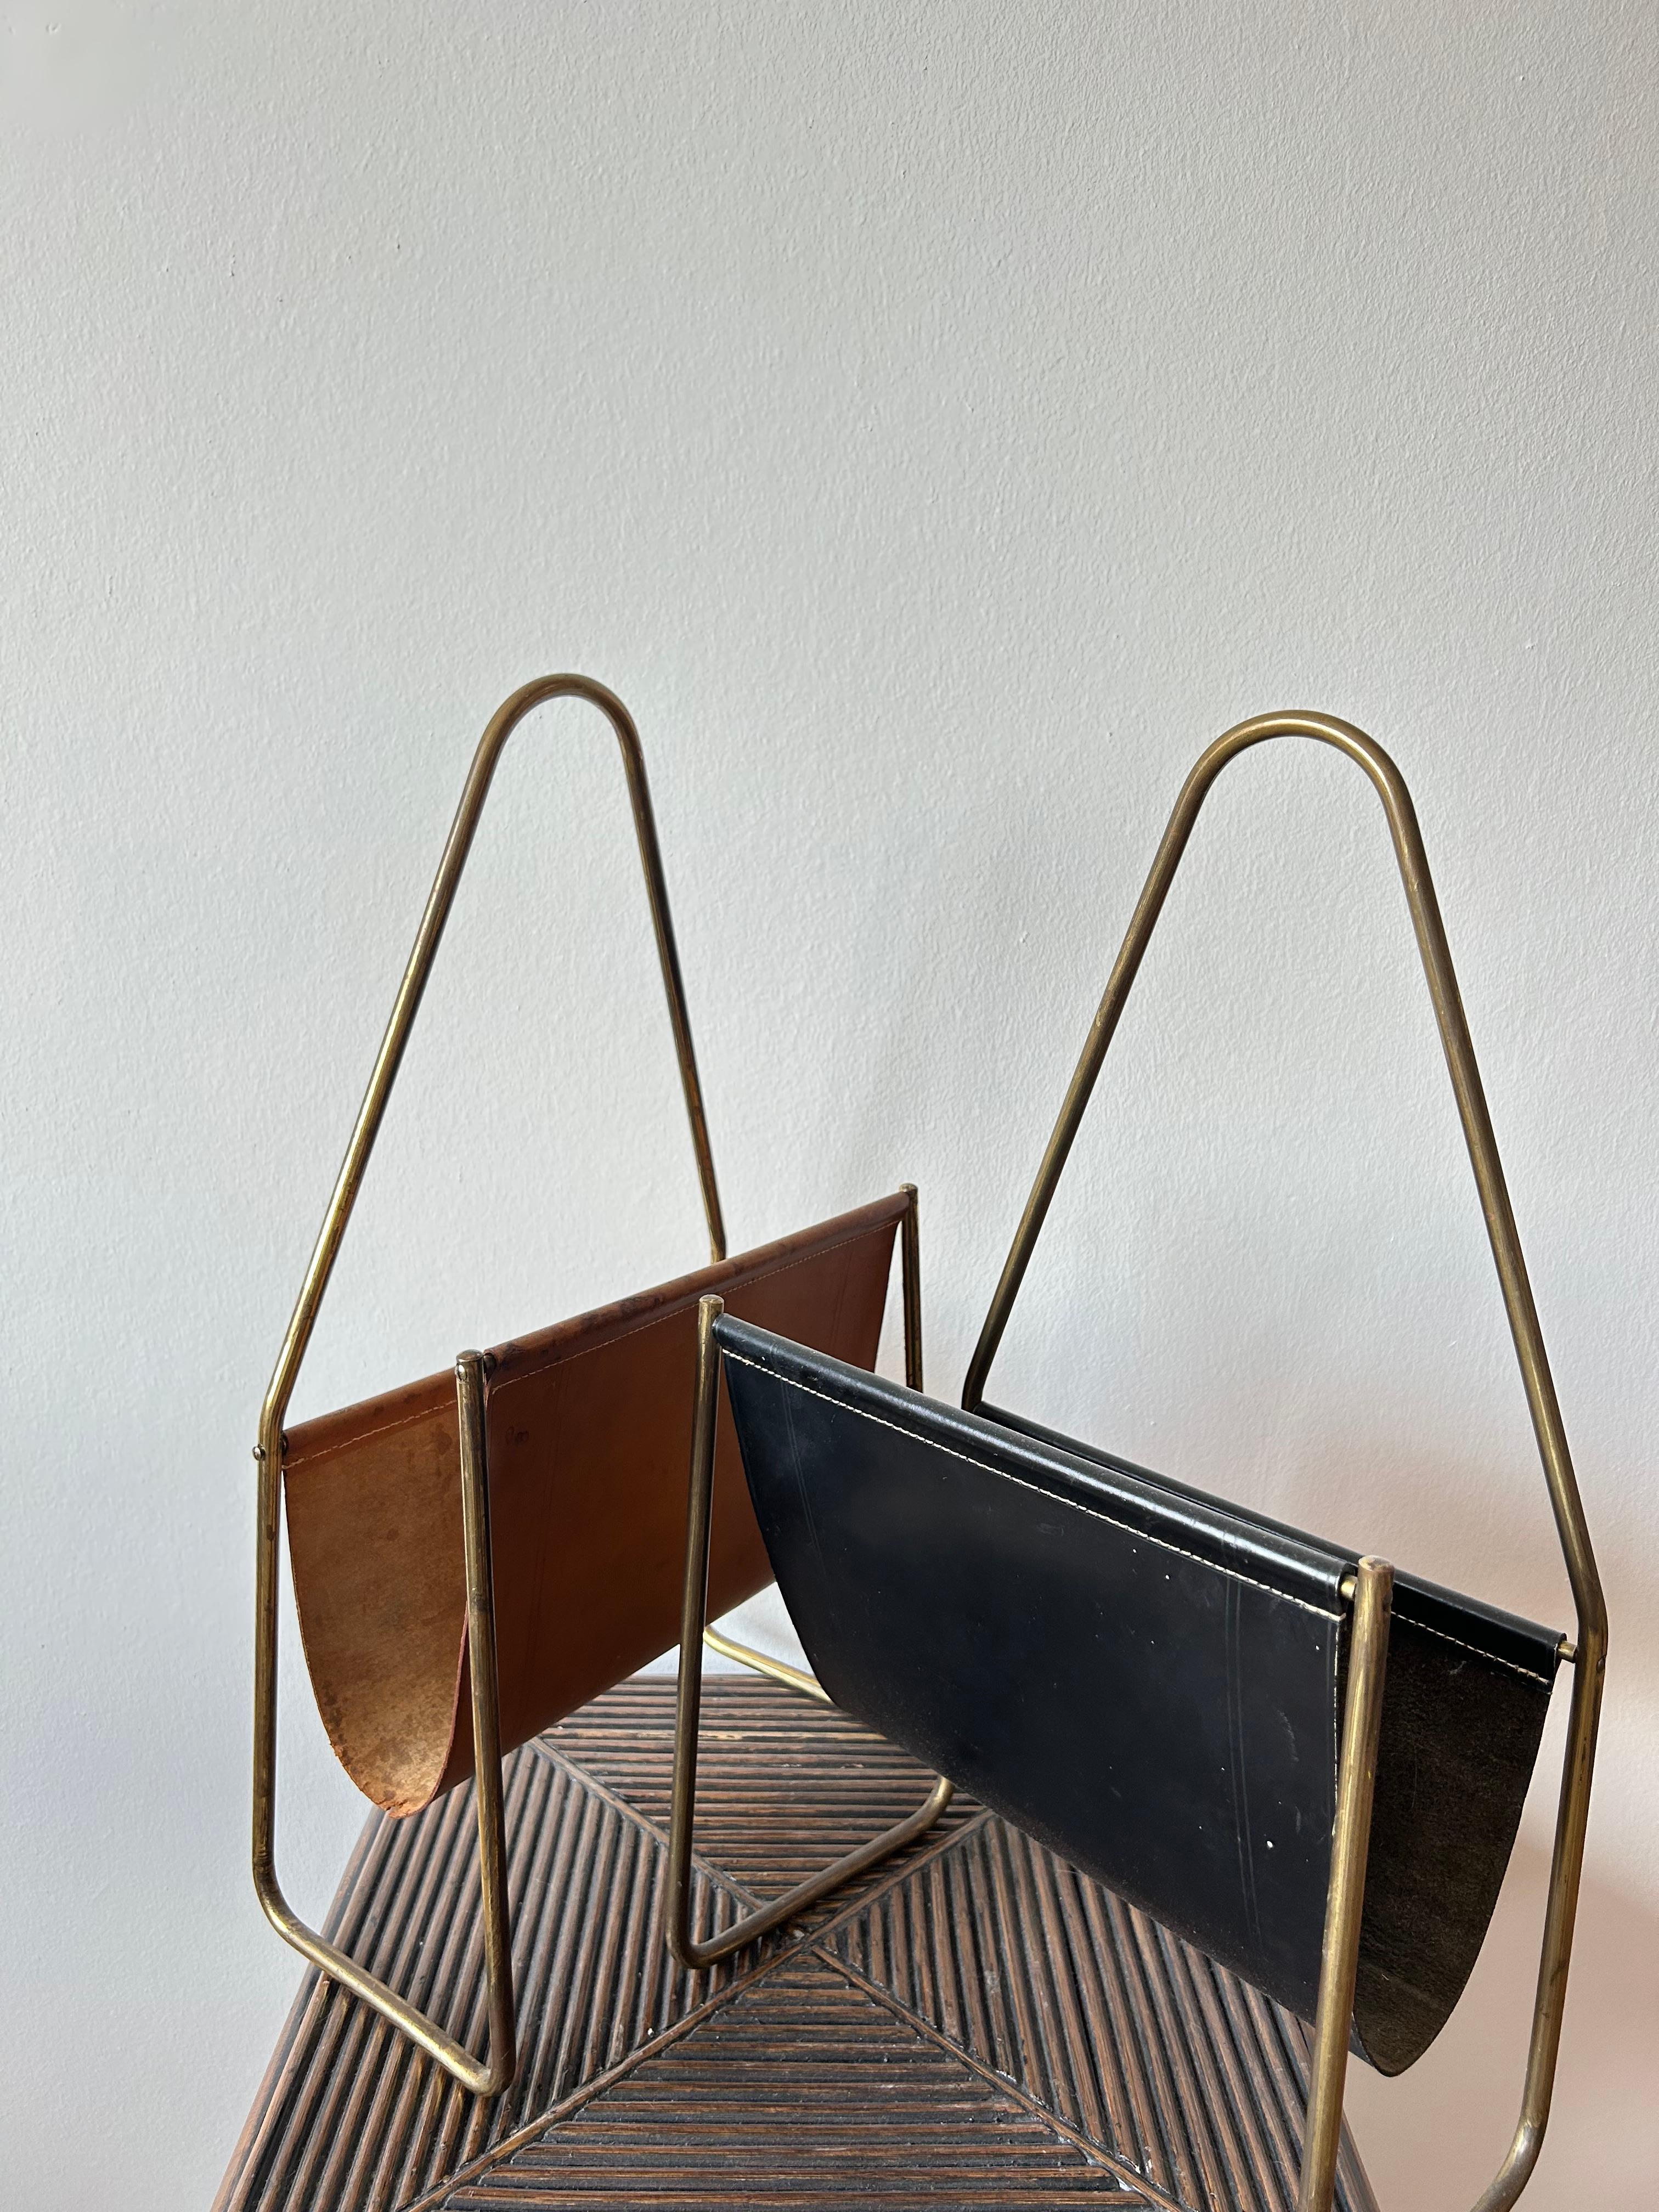 Pair of Magazine holders by Austrian designer Carl Auböck one of them in patinaed brass and thick black leather which only will get more charming over the years, the other one in patinaed brass and brown leather which will also just get more